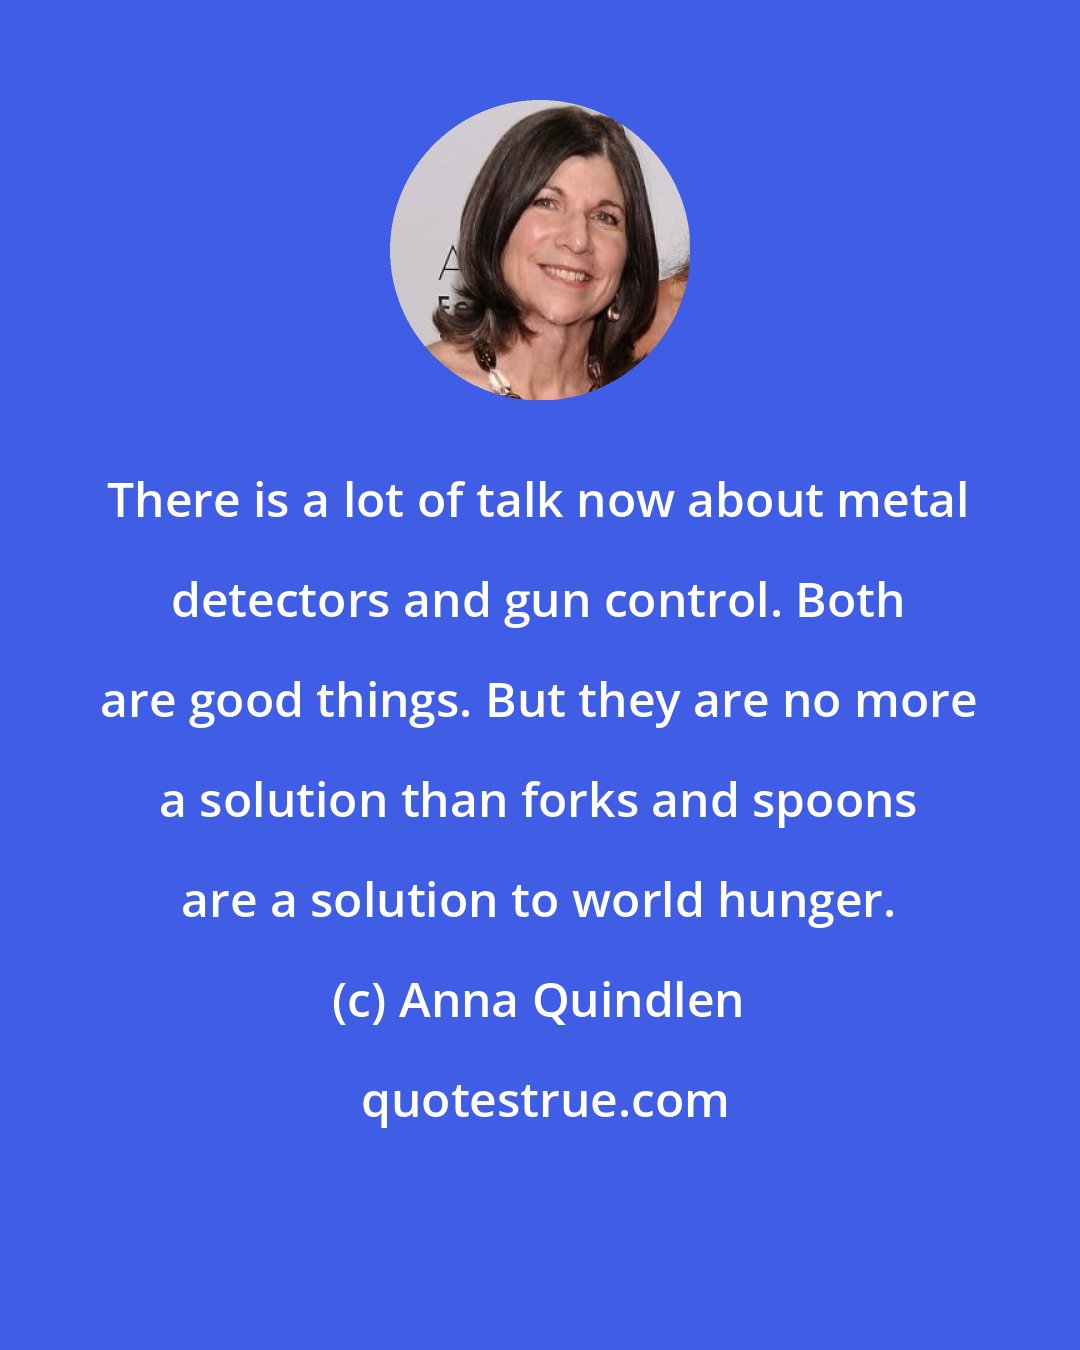 Anna Quindlen: There is a lot of talk now about metal detectors and gun control. Both are good things. But they are no more a solution than forks and spoons are a solution to world hunger.